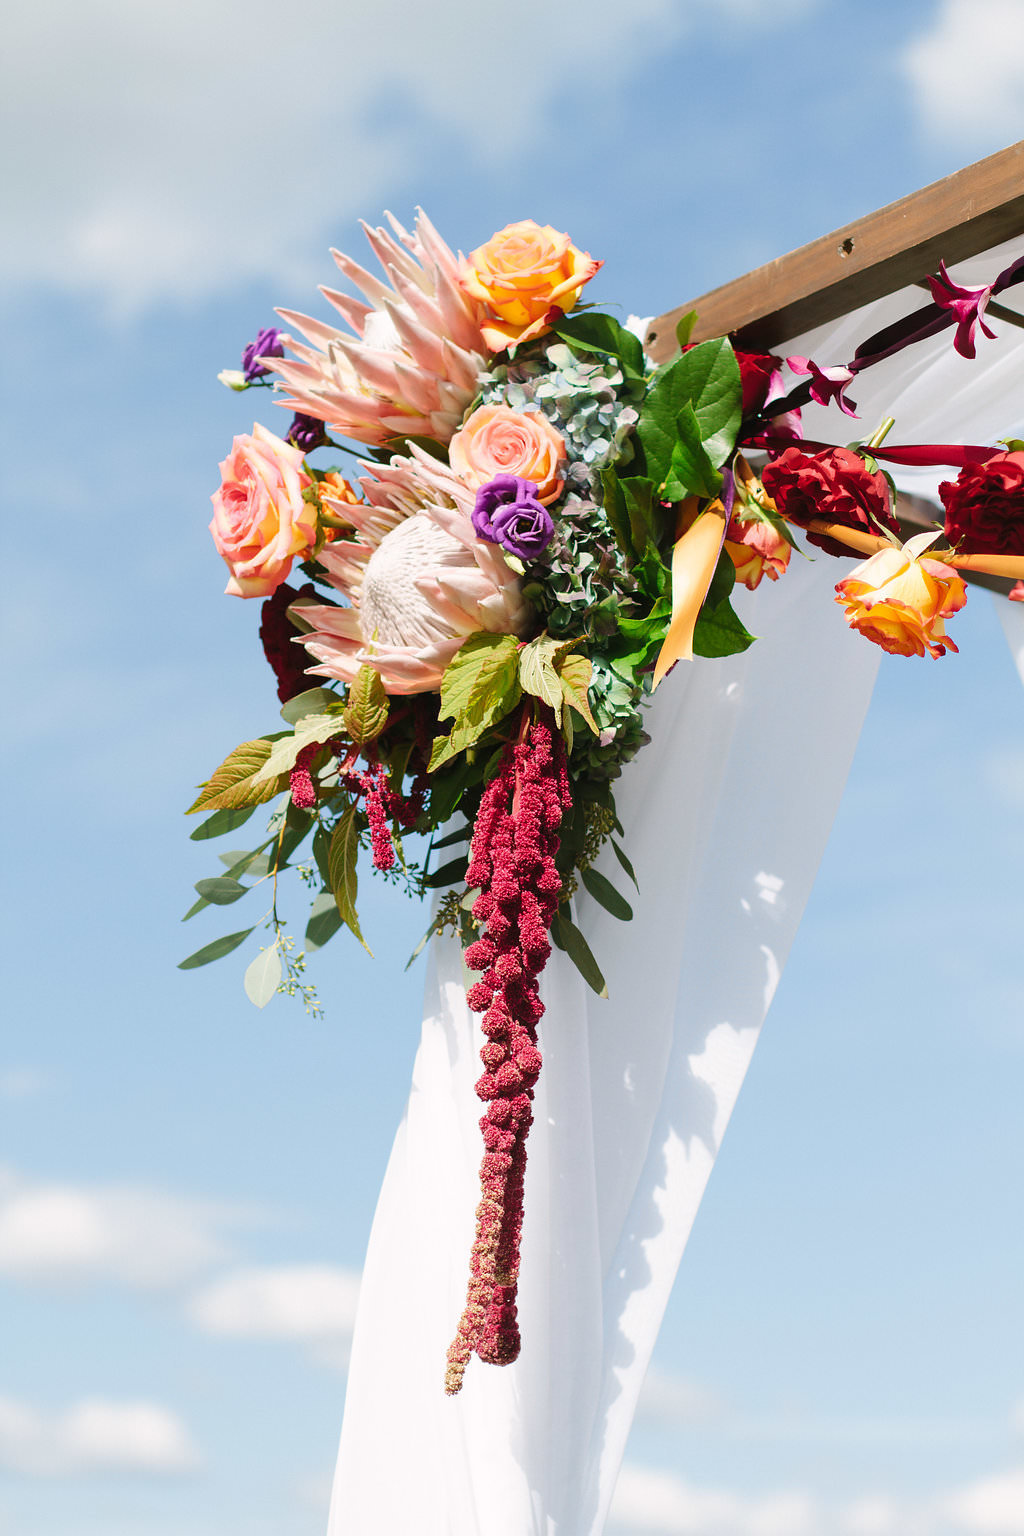 Whimsical Jewel Tone Blush Pink, Magenta, Red, Orange and Purple Tropical Wedding Ceremony Arch Flowers with White Draping